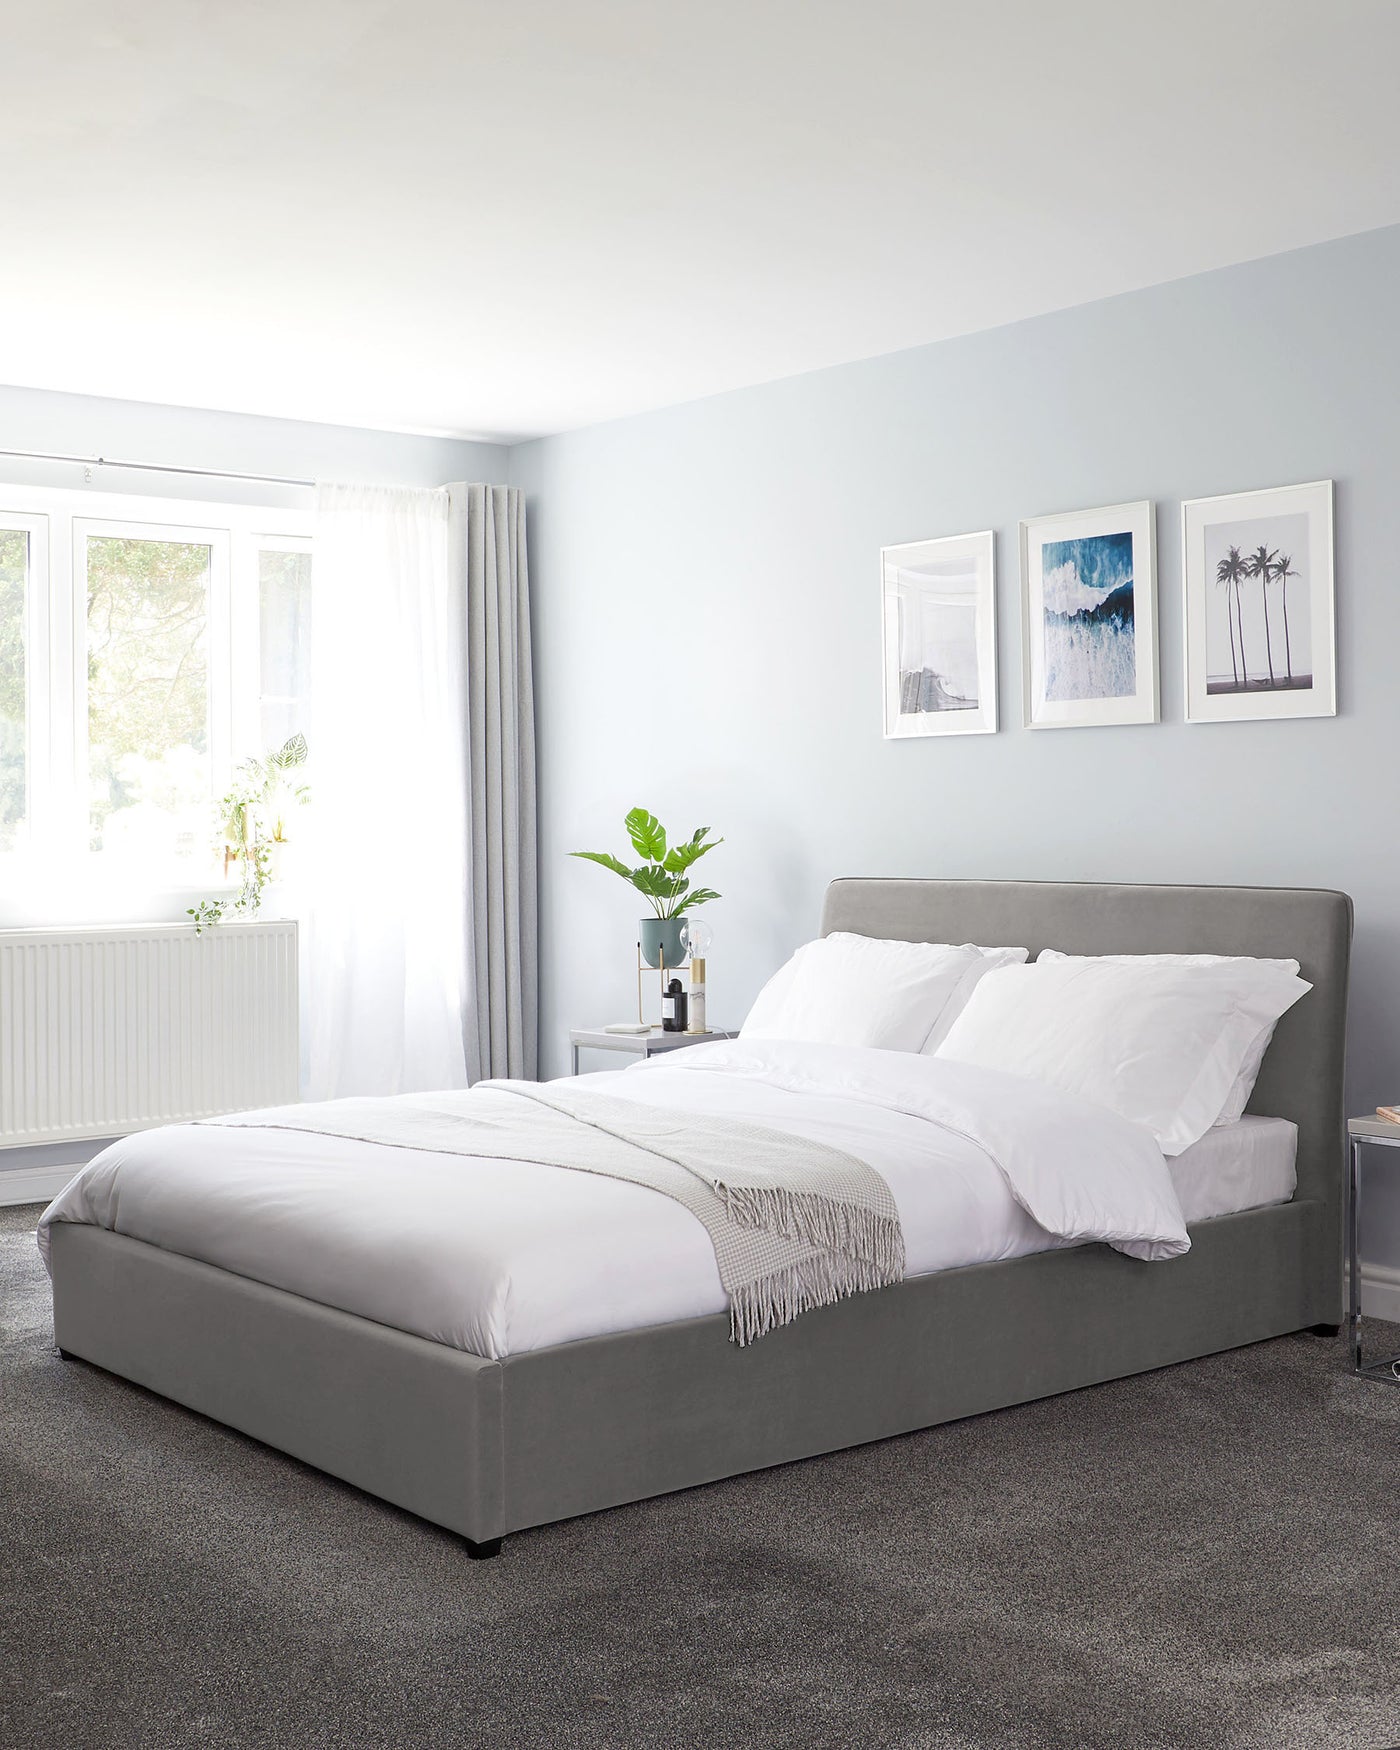 Elegant contemporary bedroom featuring a grey upholstered platform bed with a high headboard, dressed in white bedding and accented with a light fringe throw. The room has a simple bedside table with a potted plant to the side, set against a serene pale blue wall and plush grey carpeting.